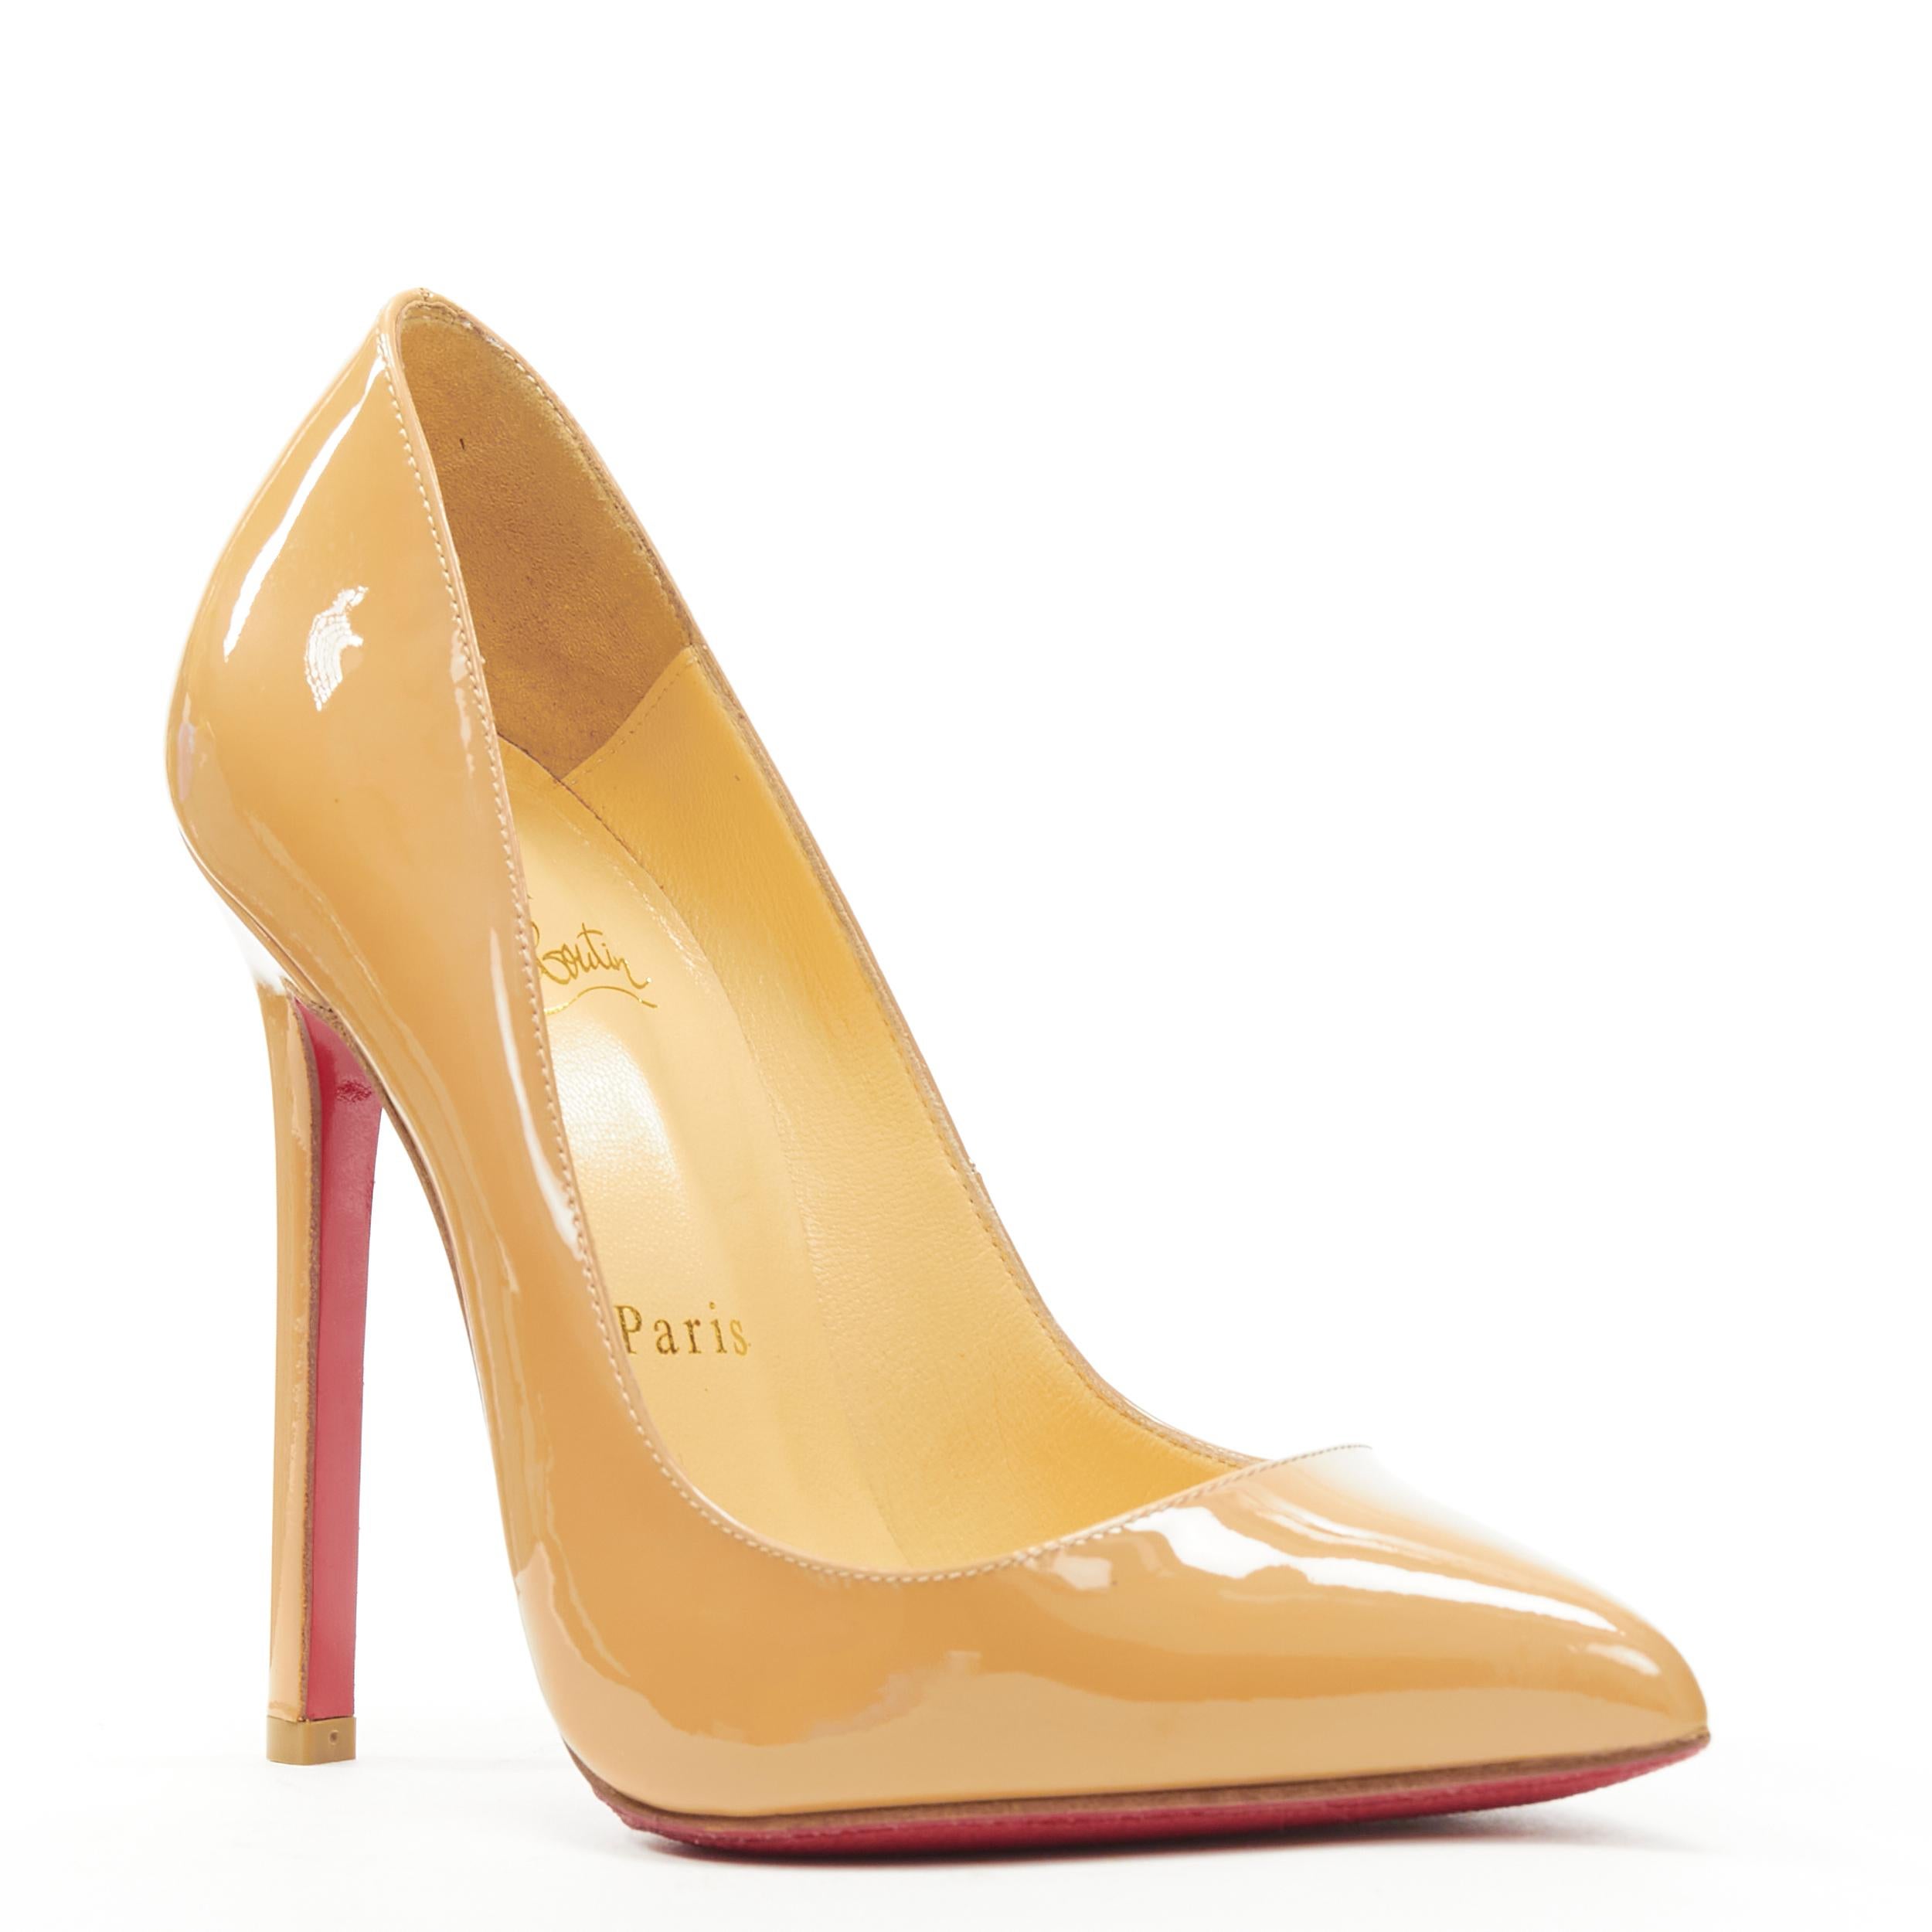 Louboutin Pigalle 120 - 4 For Sale on 1stDibs | christian louboutin pigalle  120, christian louboutin pigalle, pigalle 120mm